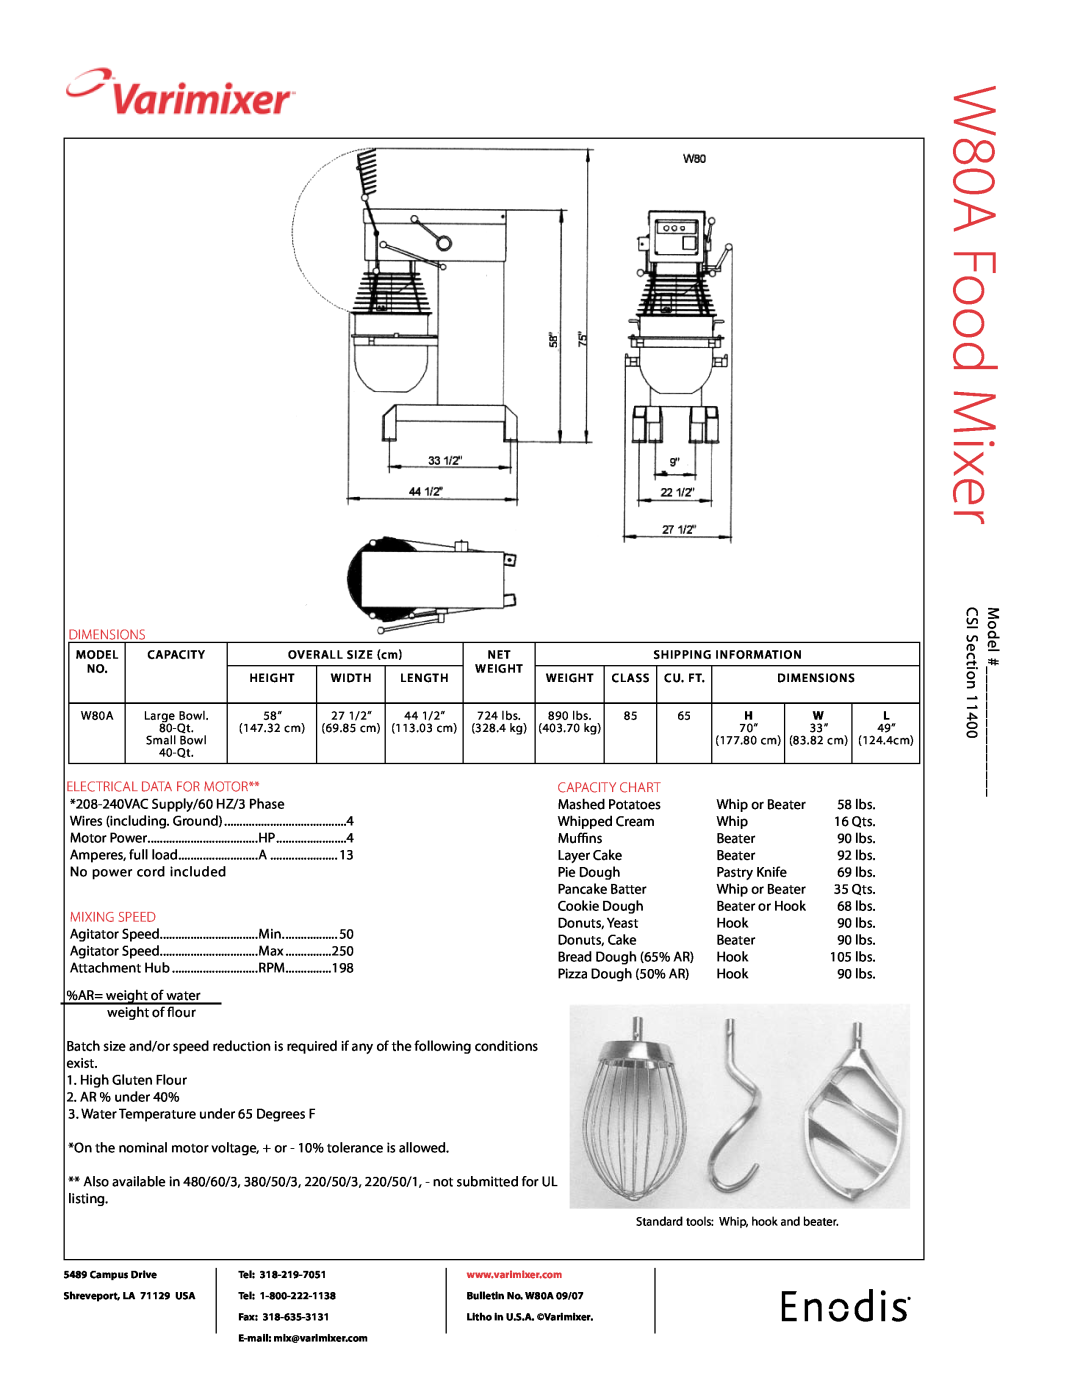 Varimixer specifications W80A Food Mixer, dimensions, electrical data for motor, capacity chart, mixing speed 